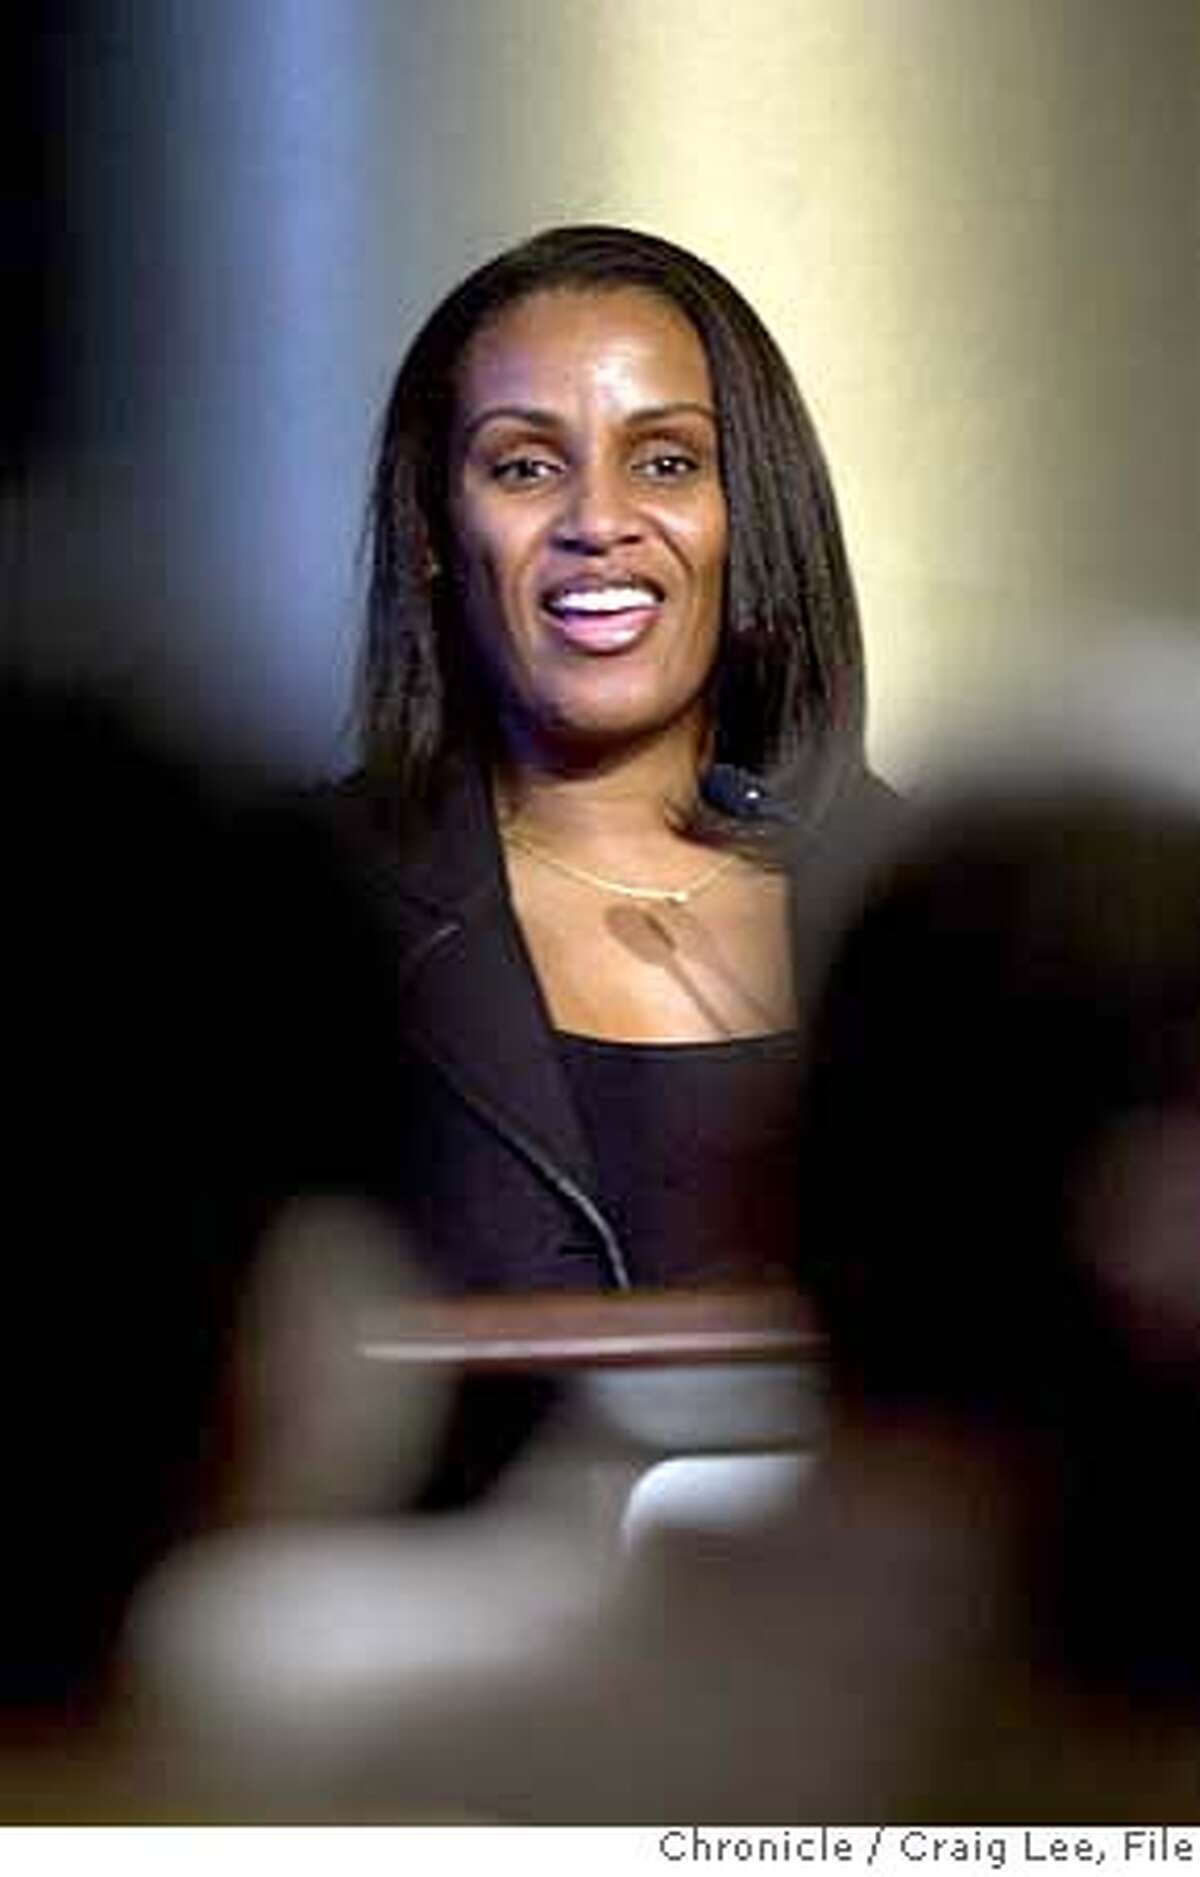 BROWN07B-C-06JAN03-MT-CL Inauguration of Jerry Brown as Mayor of Oakland in his second term. Photo of Desley Brooks of District #6, making a speech. Photo by Craig Lee/San Francisco ChronicleRan on: 05-01-2006 Desley Brooks was elected to the City Council from Oaklands District 6 in 2002.Ran on: 05-01-2006 Desley BrooksRan on: 05-01-2006 Desley BrooksRan on: 05-01-2006 Desley Brooks was elected to the City Council from Oaklands District 6 in 2002.